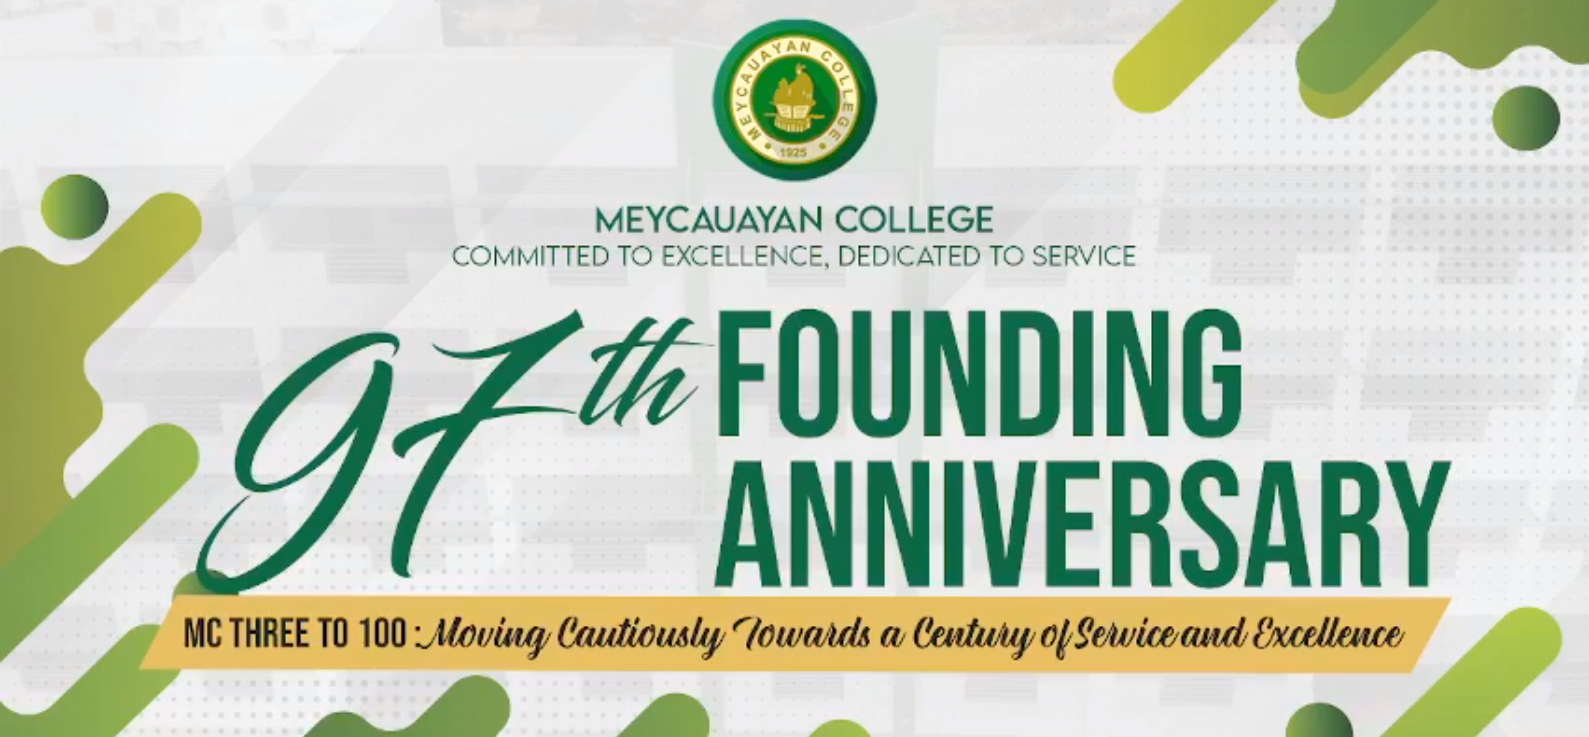 Countdown to Three: MC makes it to ninety-seven years